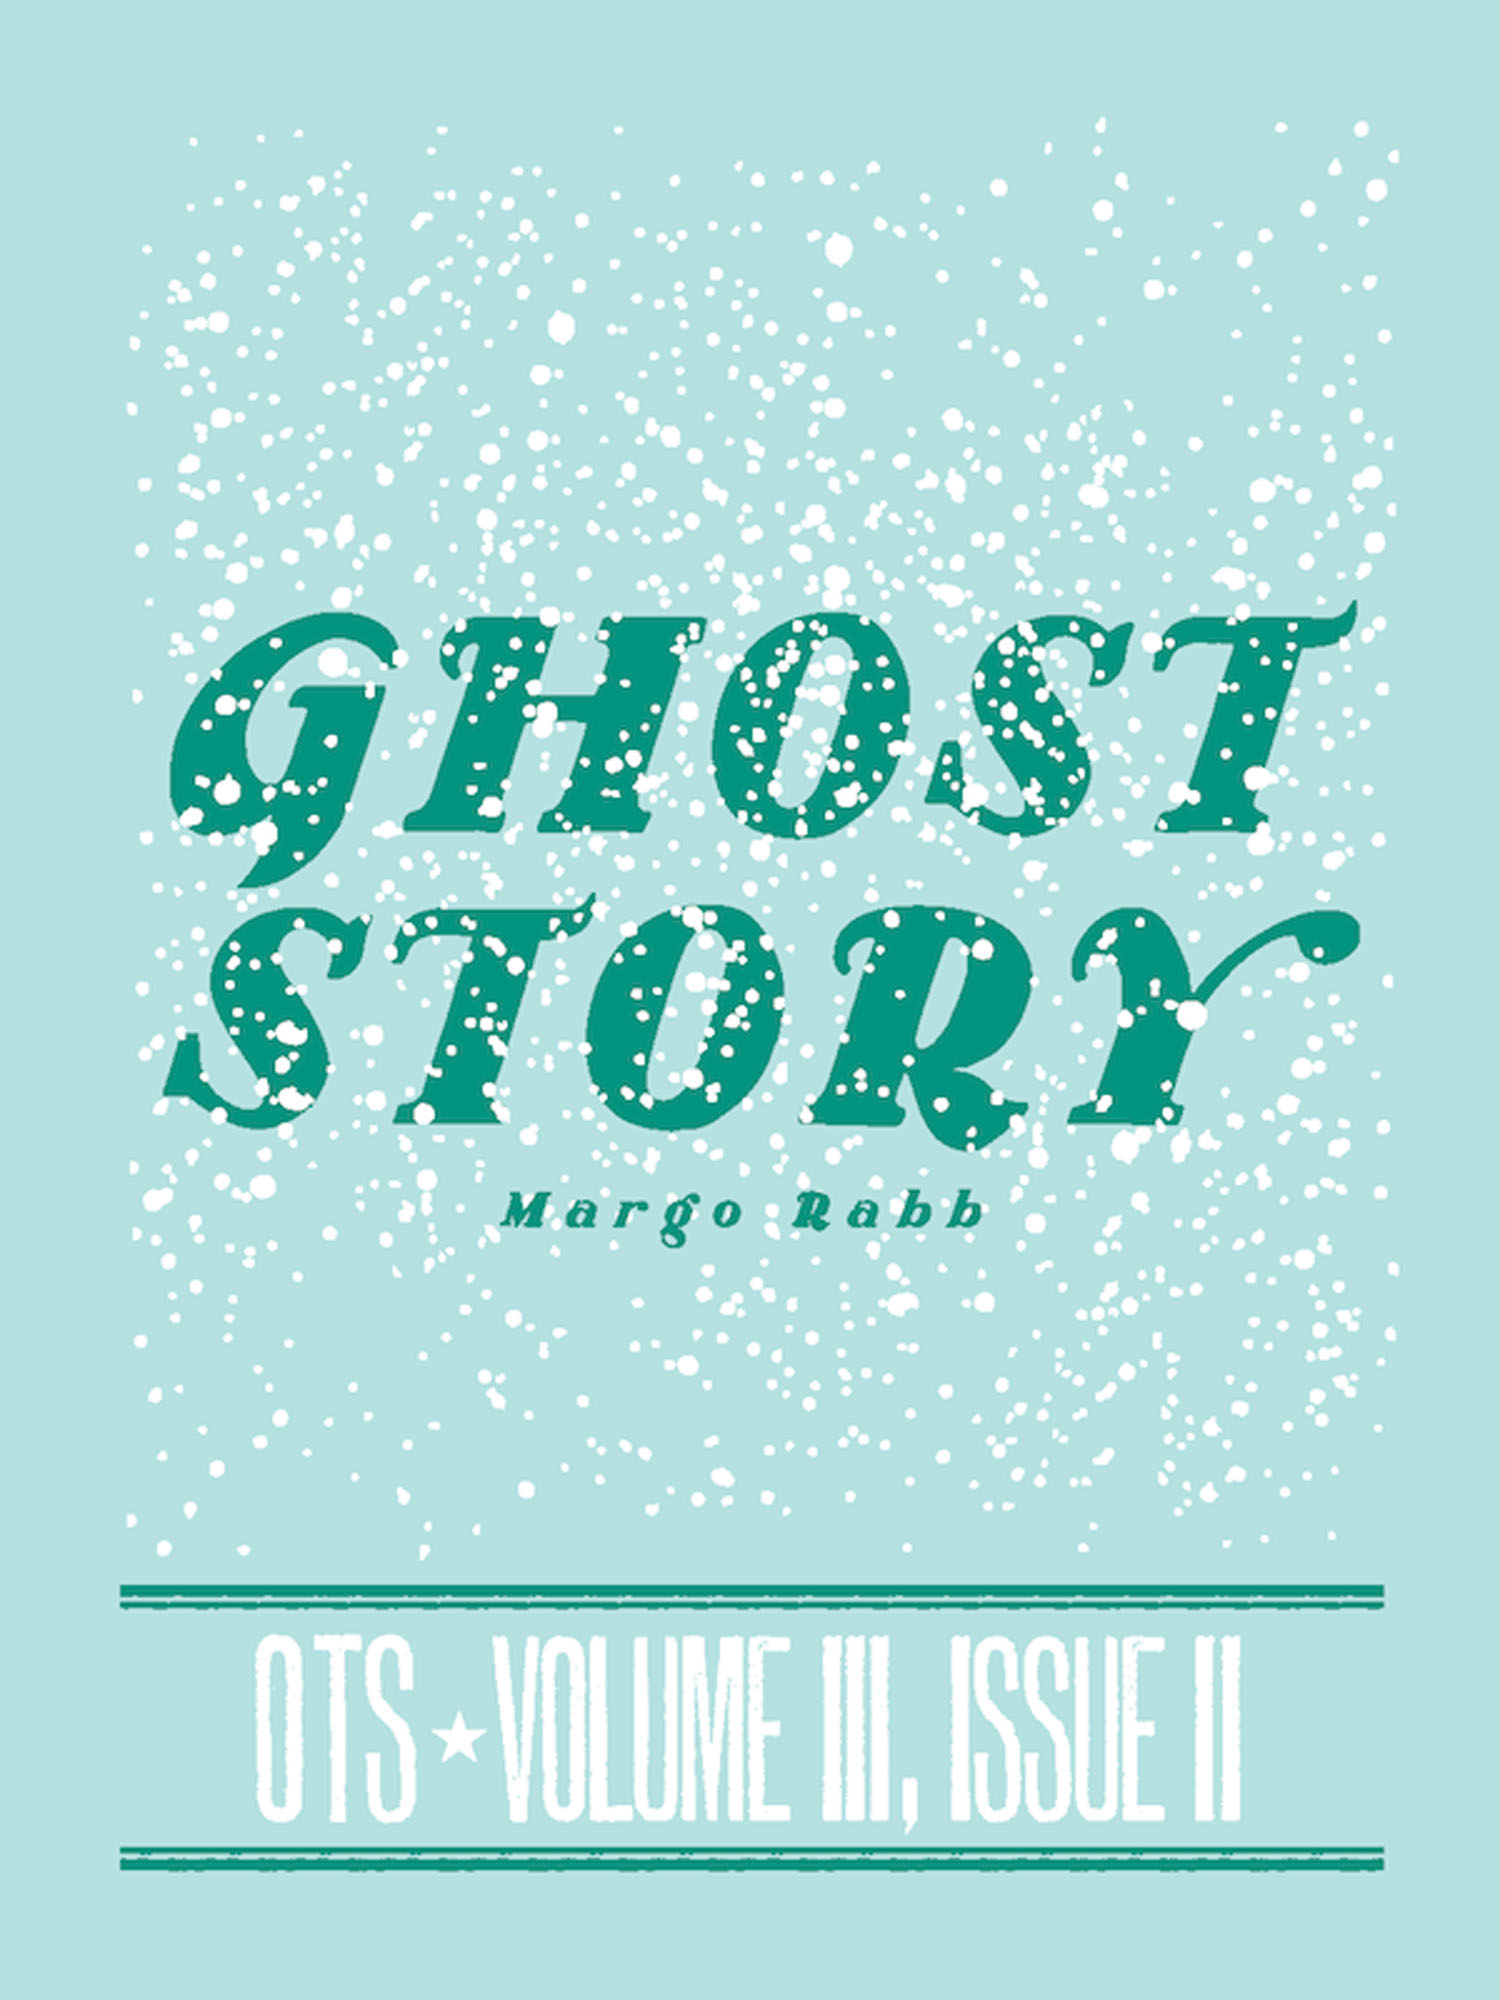 Ghost Story Cover